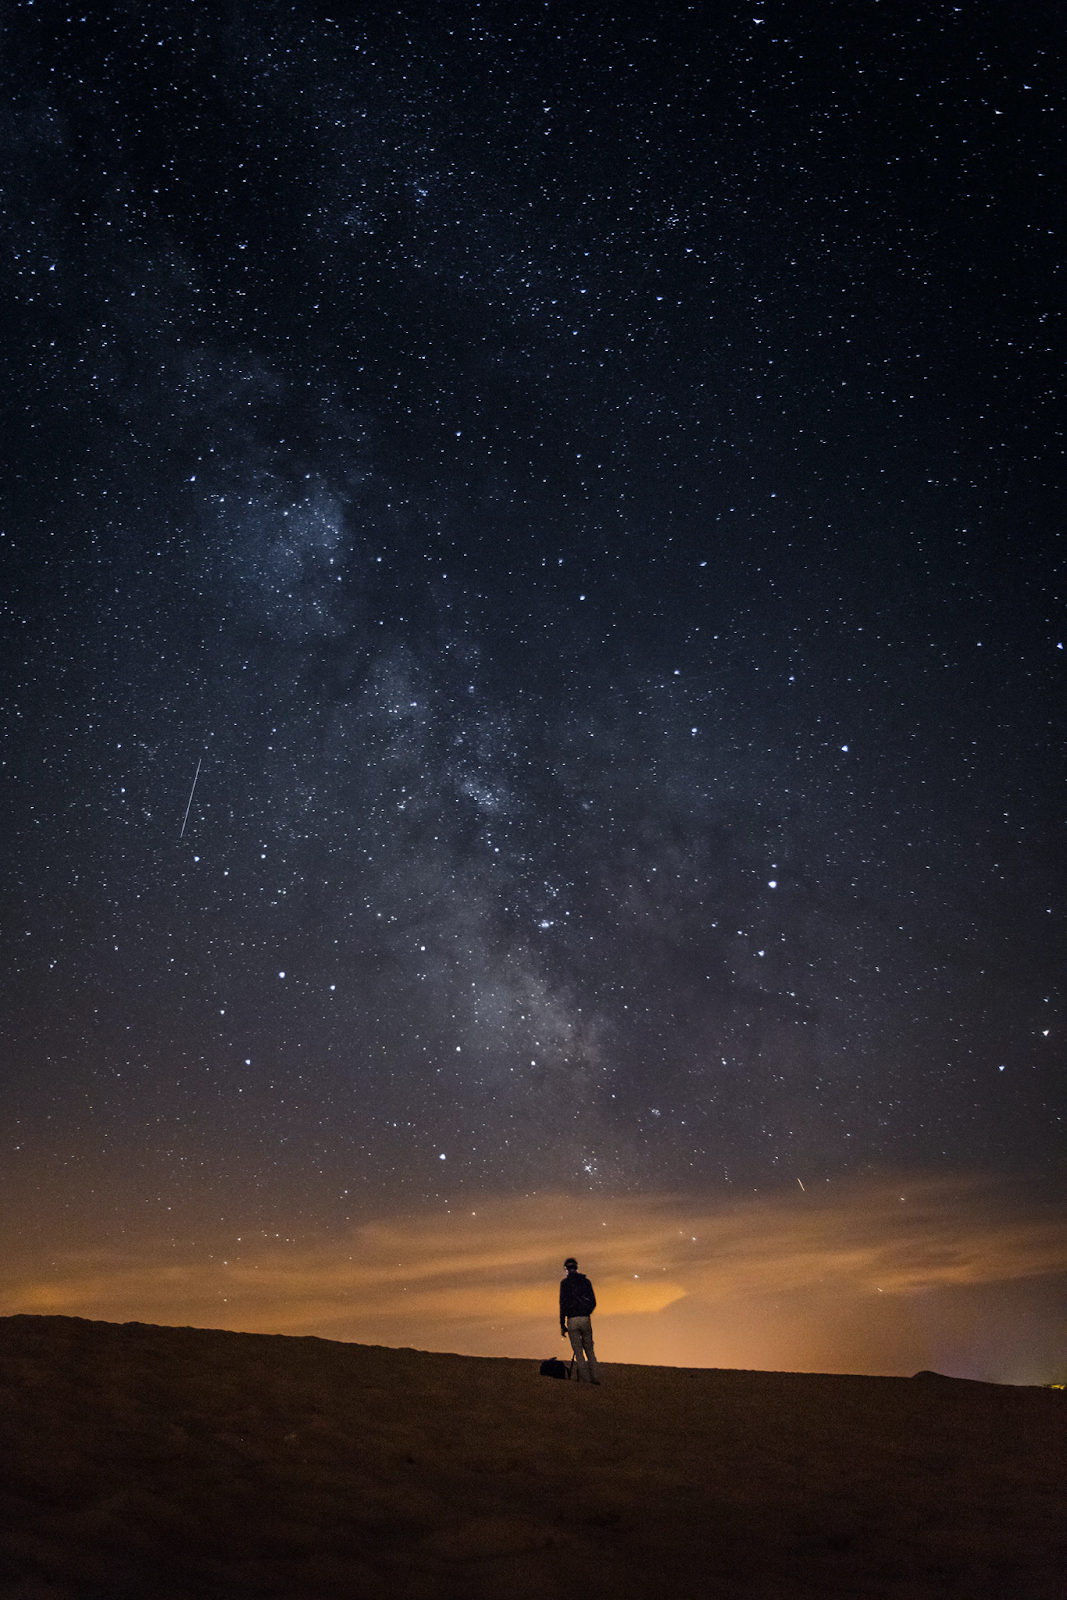 A person exploring the beautiful night sky.